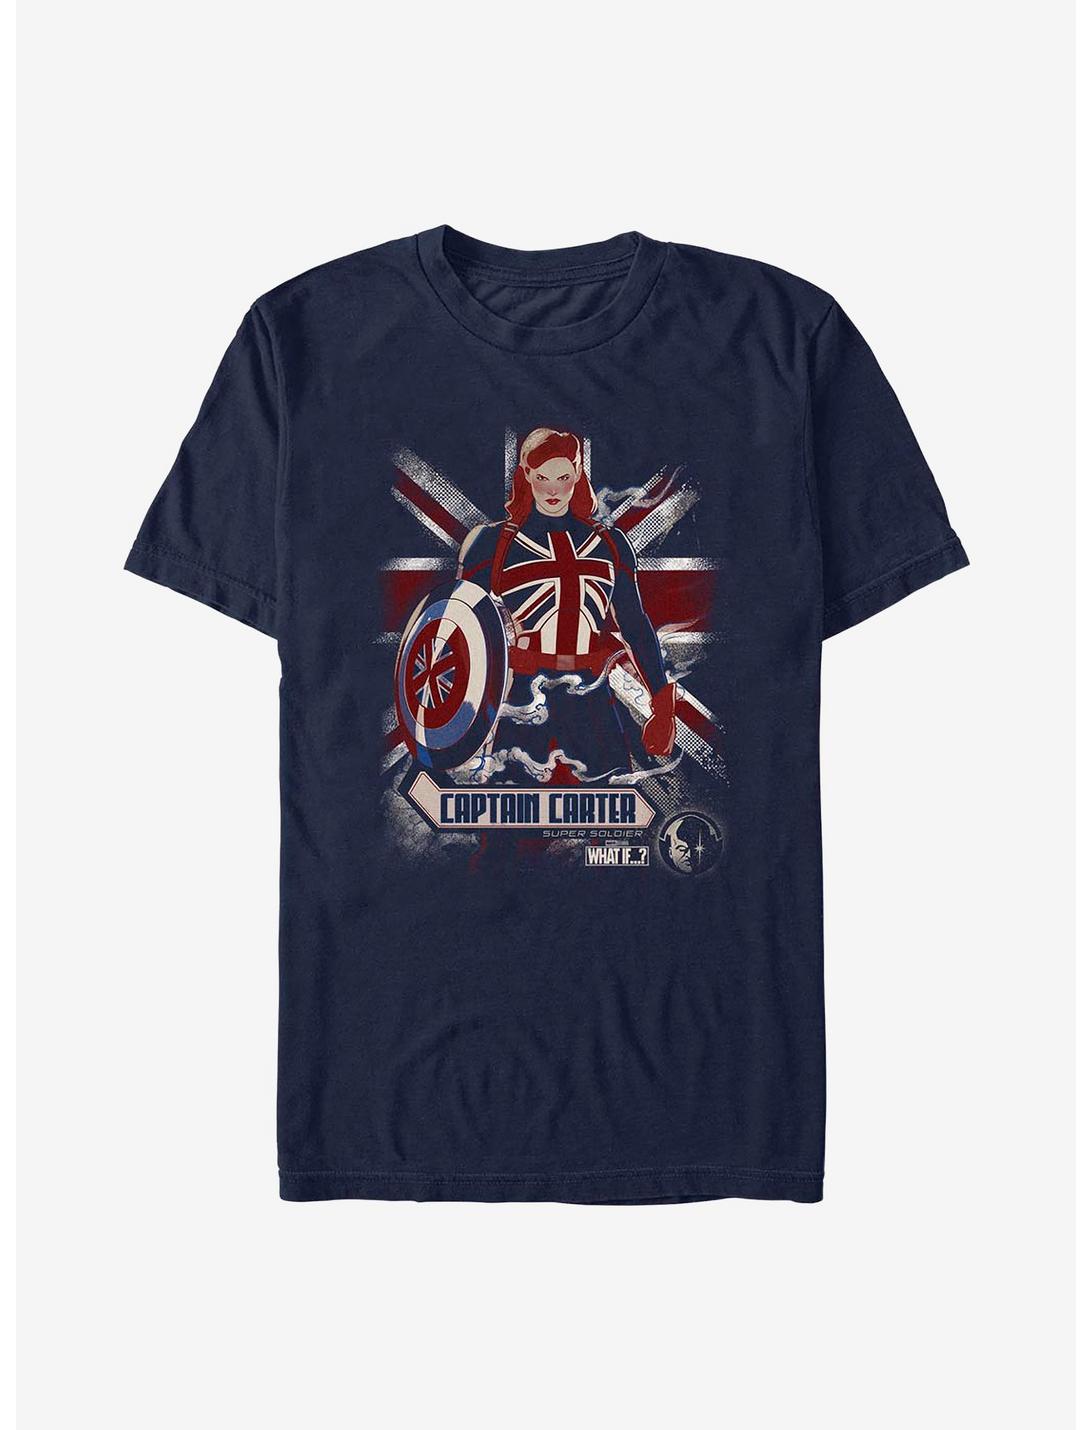 Marvel What If...? Union Jacked T-Shirt, NAVY, hi-res